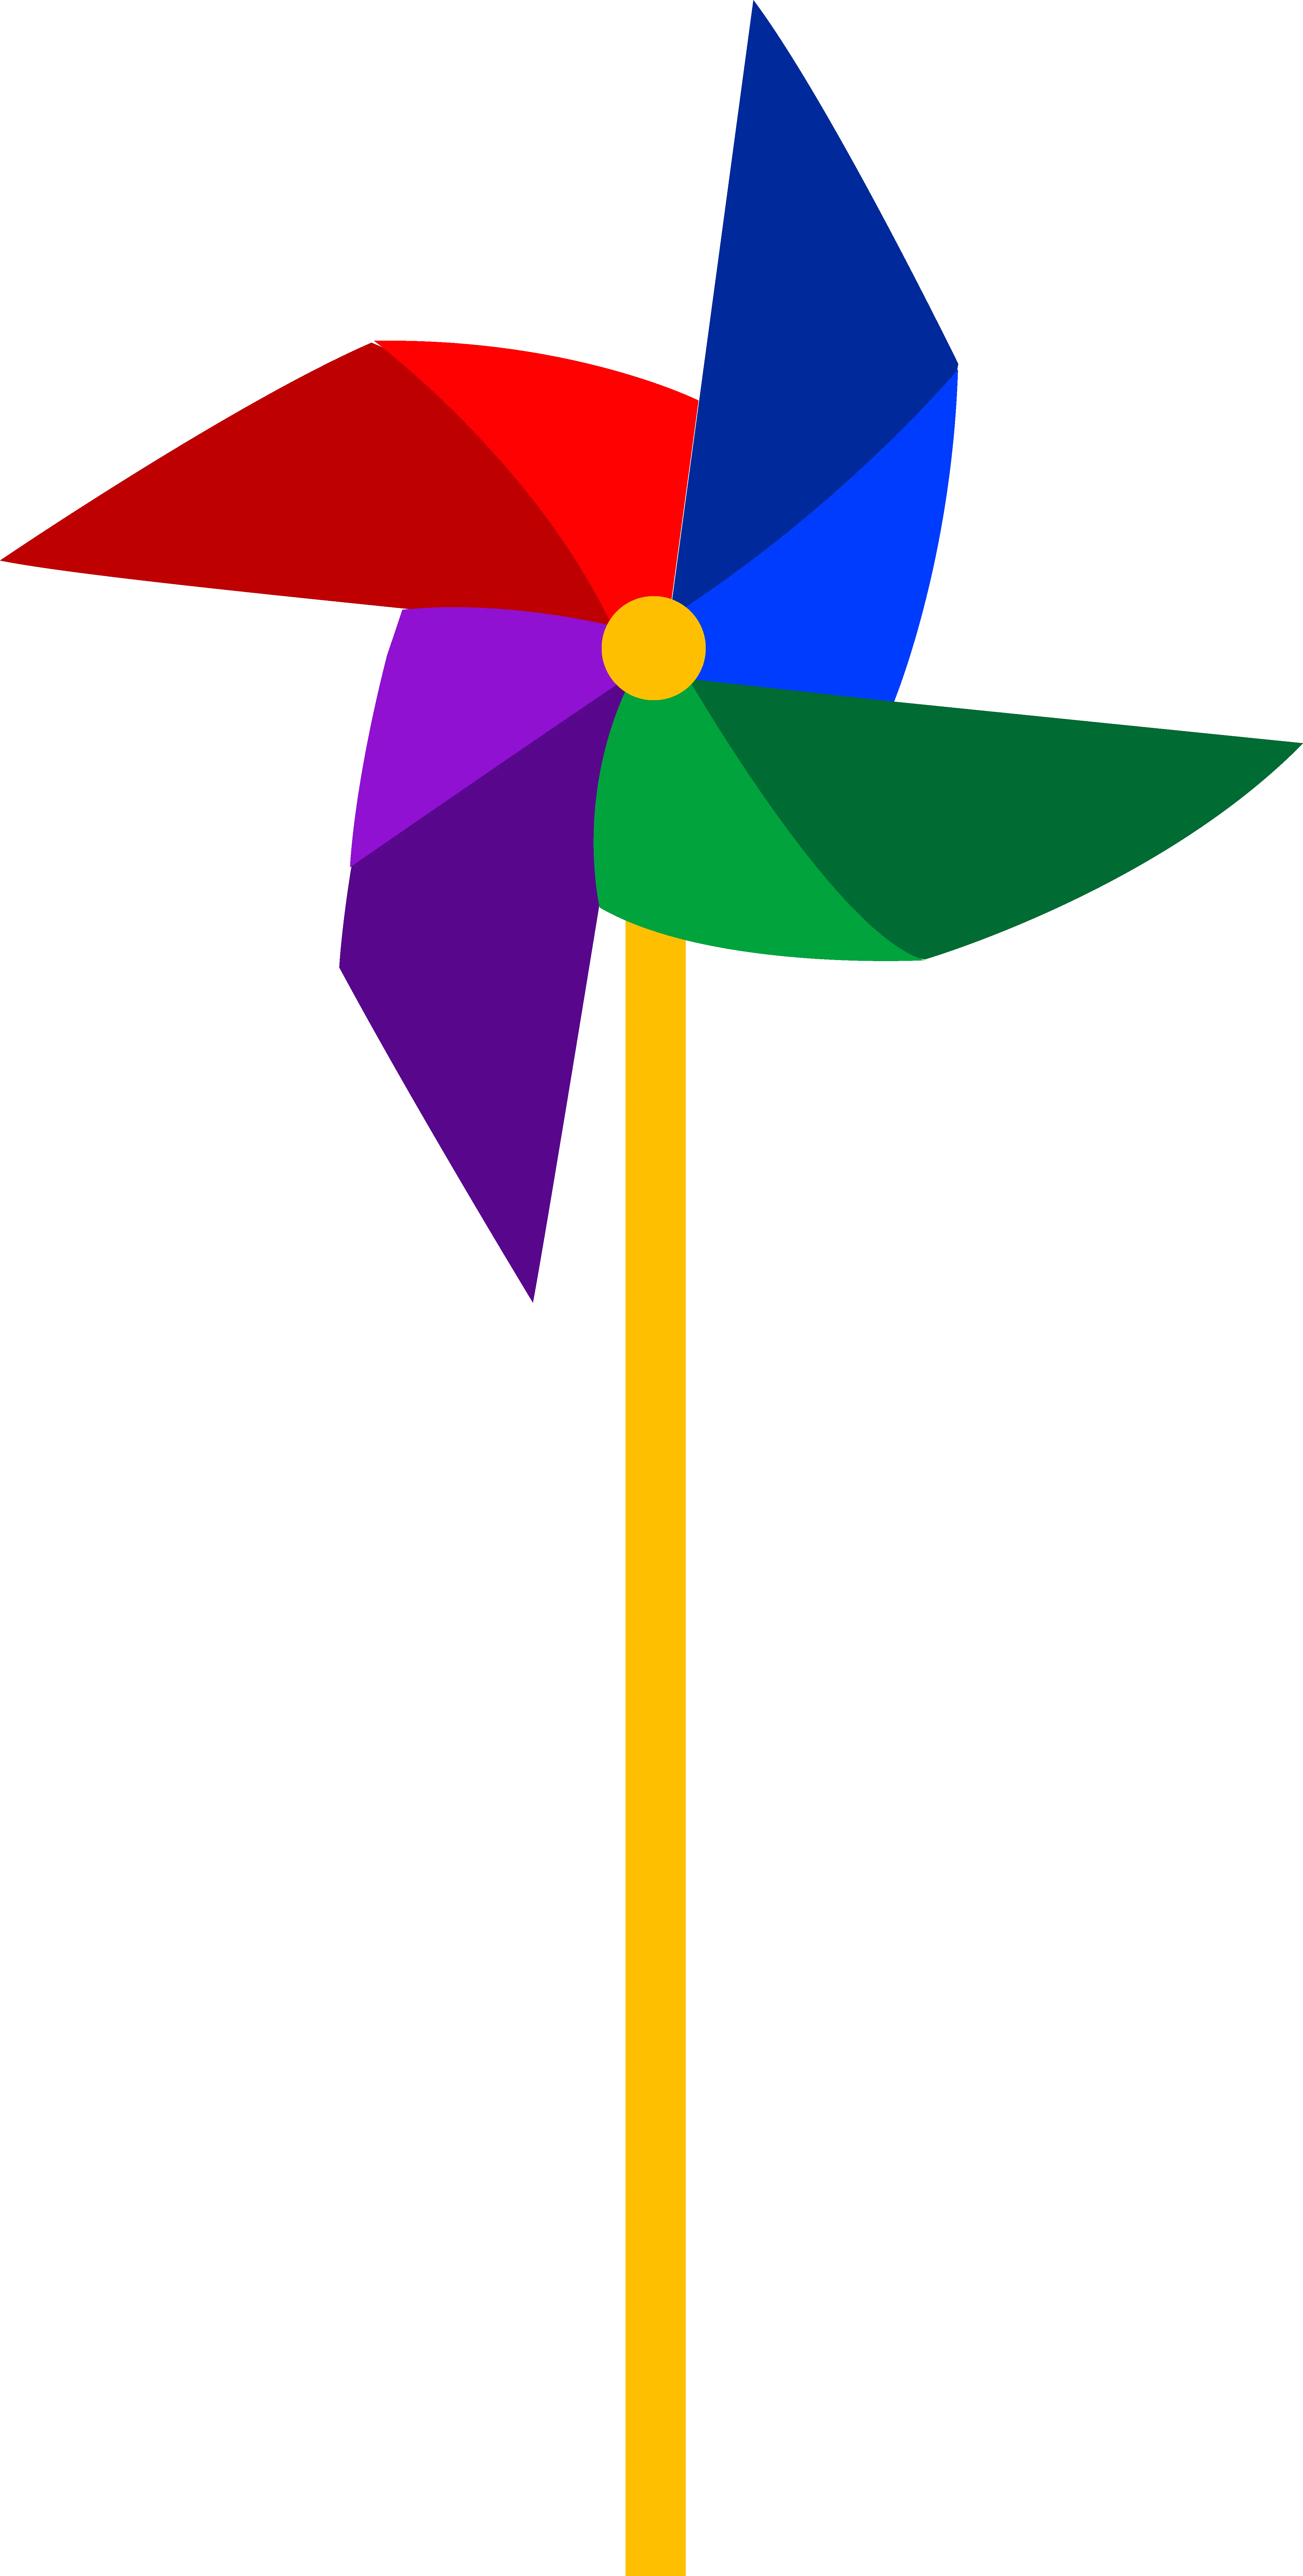 Download Windmill Clipart Colourful Pinwheel Clipart Pinwheel Clipart Png Windmill Png